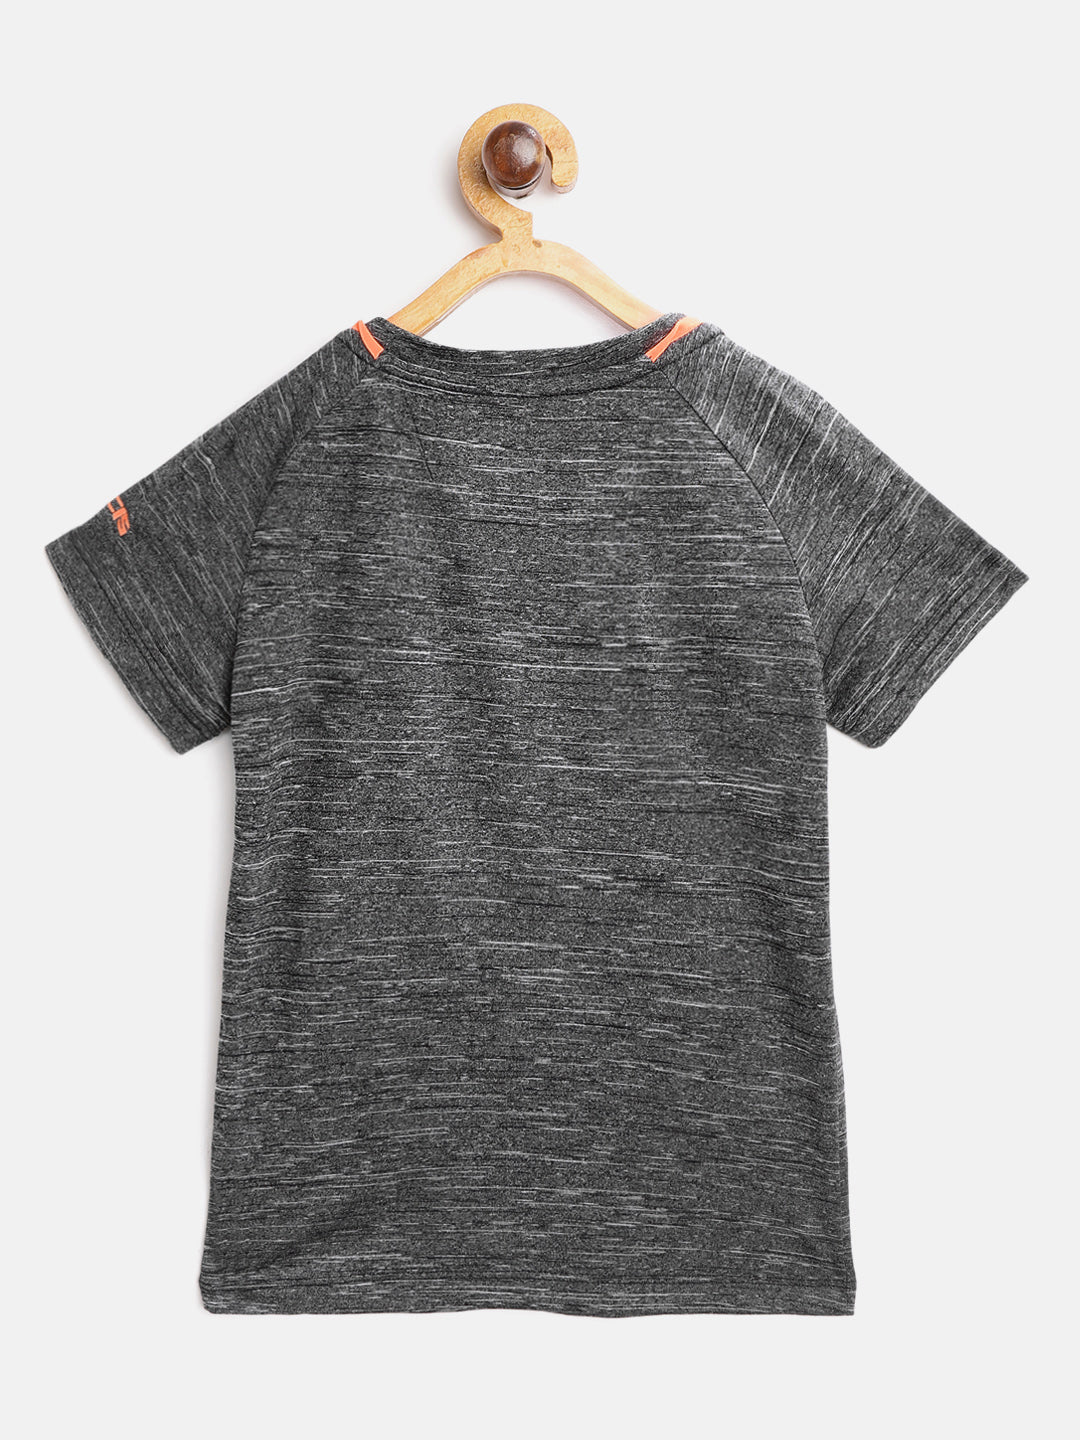 Alcis Girls Charcoal Grey Printed Round Neck T-shirt